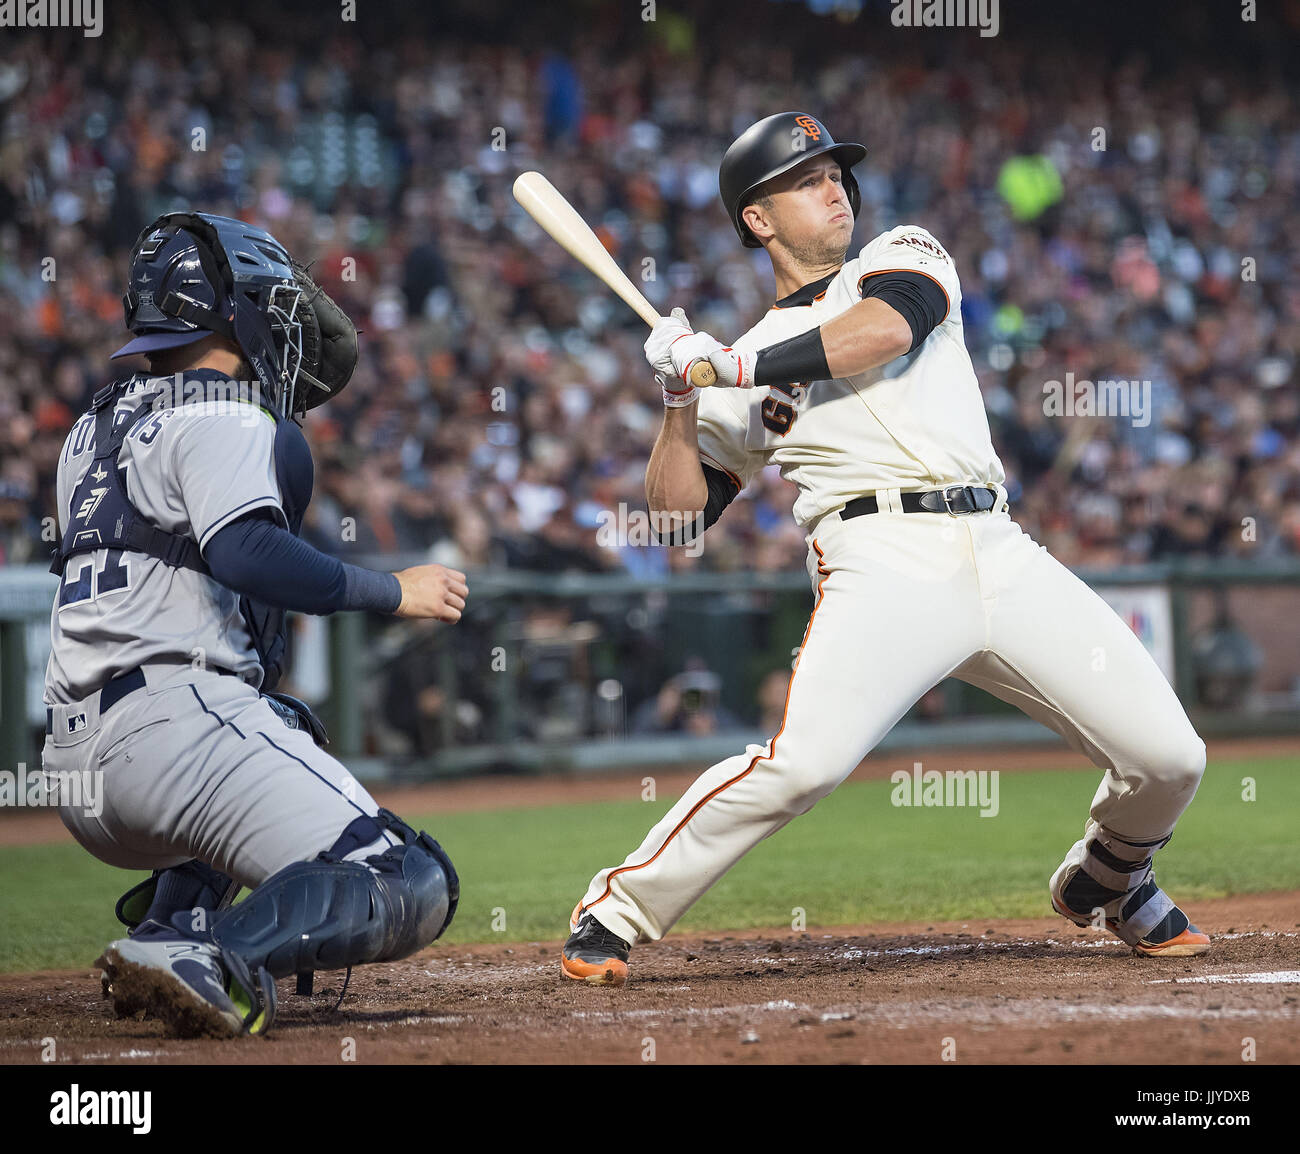 San Francisco, California, USA. 20th July, 2017. San Francisco Giants catcher Buster Posey (28) takes an inside first pitch in the fourth inning, during a MLB game between the San Diego Padres and the San Francisco Giants at AT&T Park in San Francisco, California. Valerie Shoaps/CSM/Alamy Live News Stock Photo